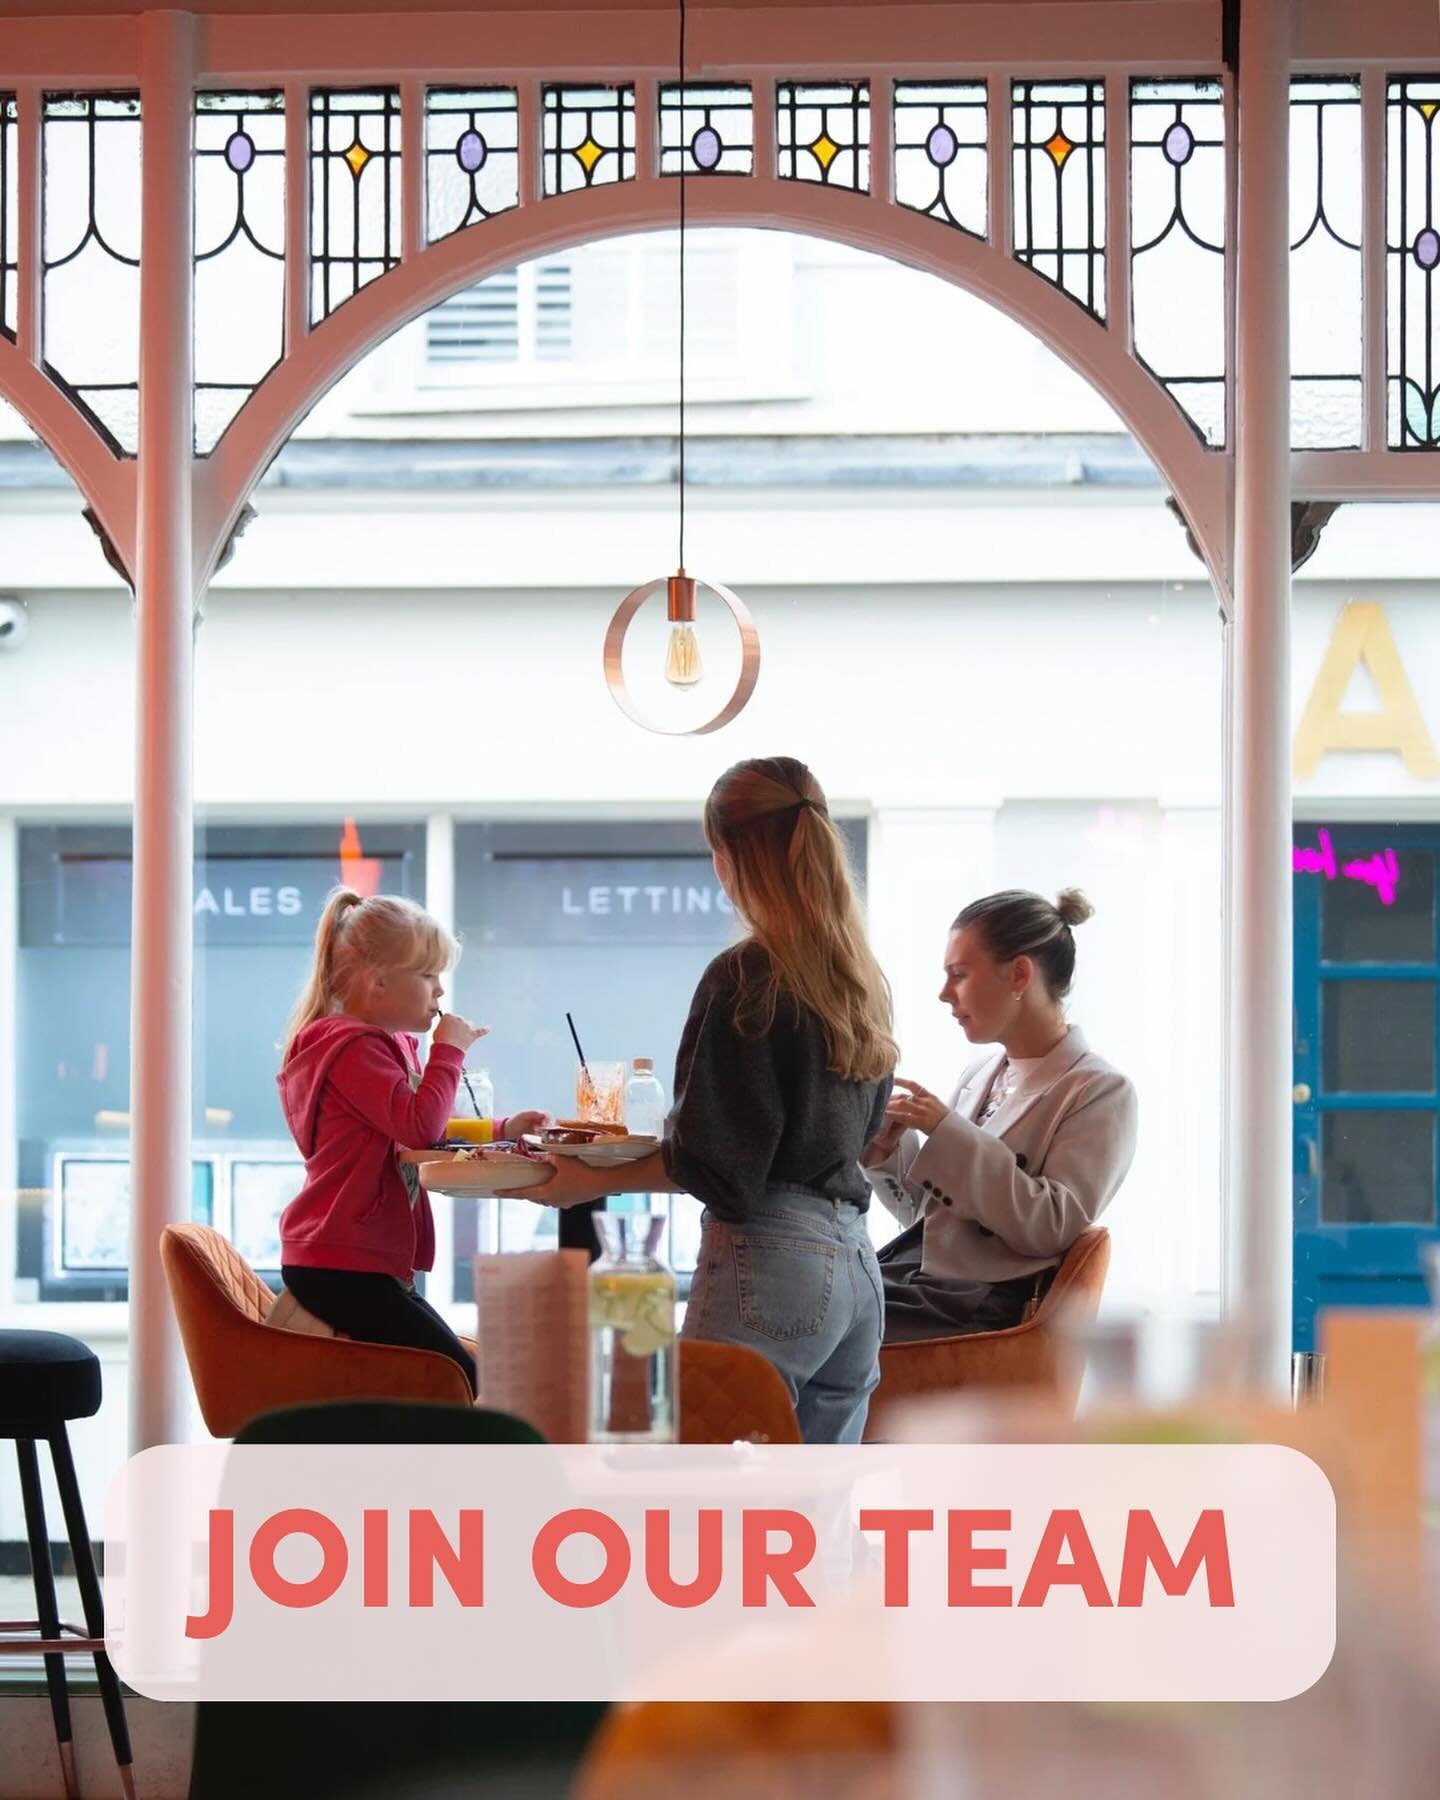 🍑 JOIN OUR TEAM 🍑
We are looking to build the team to help take PEACH. to the next level. 
If you have high standards, take pride in your work and put the customer experience first then we want to meet you. 
Competitive Salaries, career progression